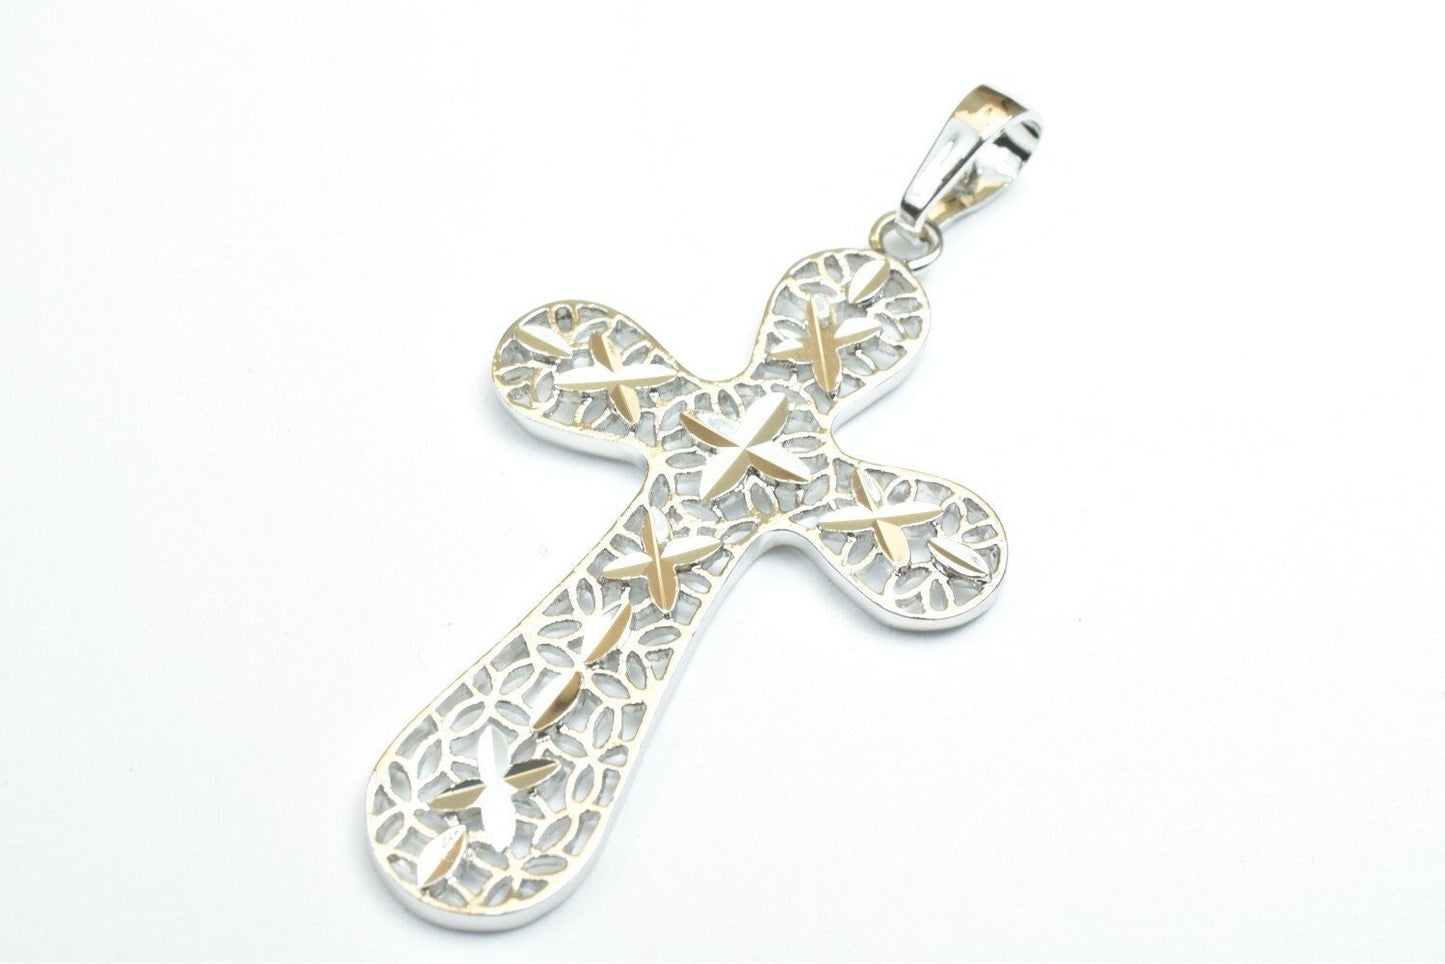 White as as gold filled* tarnish resistant cross pendant filigree rhodium plated charm size 43x26.5mm, thickness 2mm for jewelry making rp67